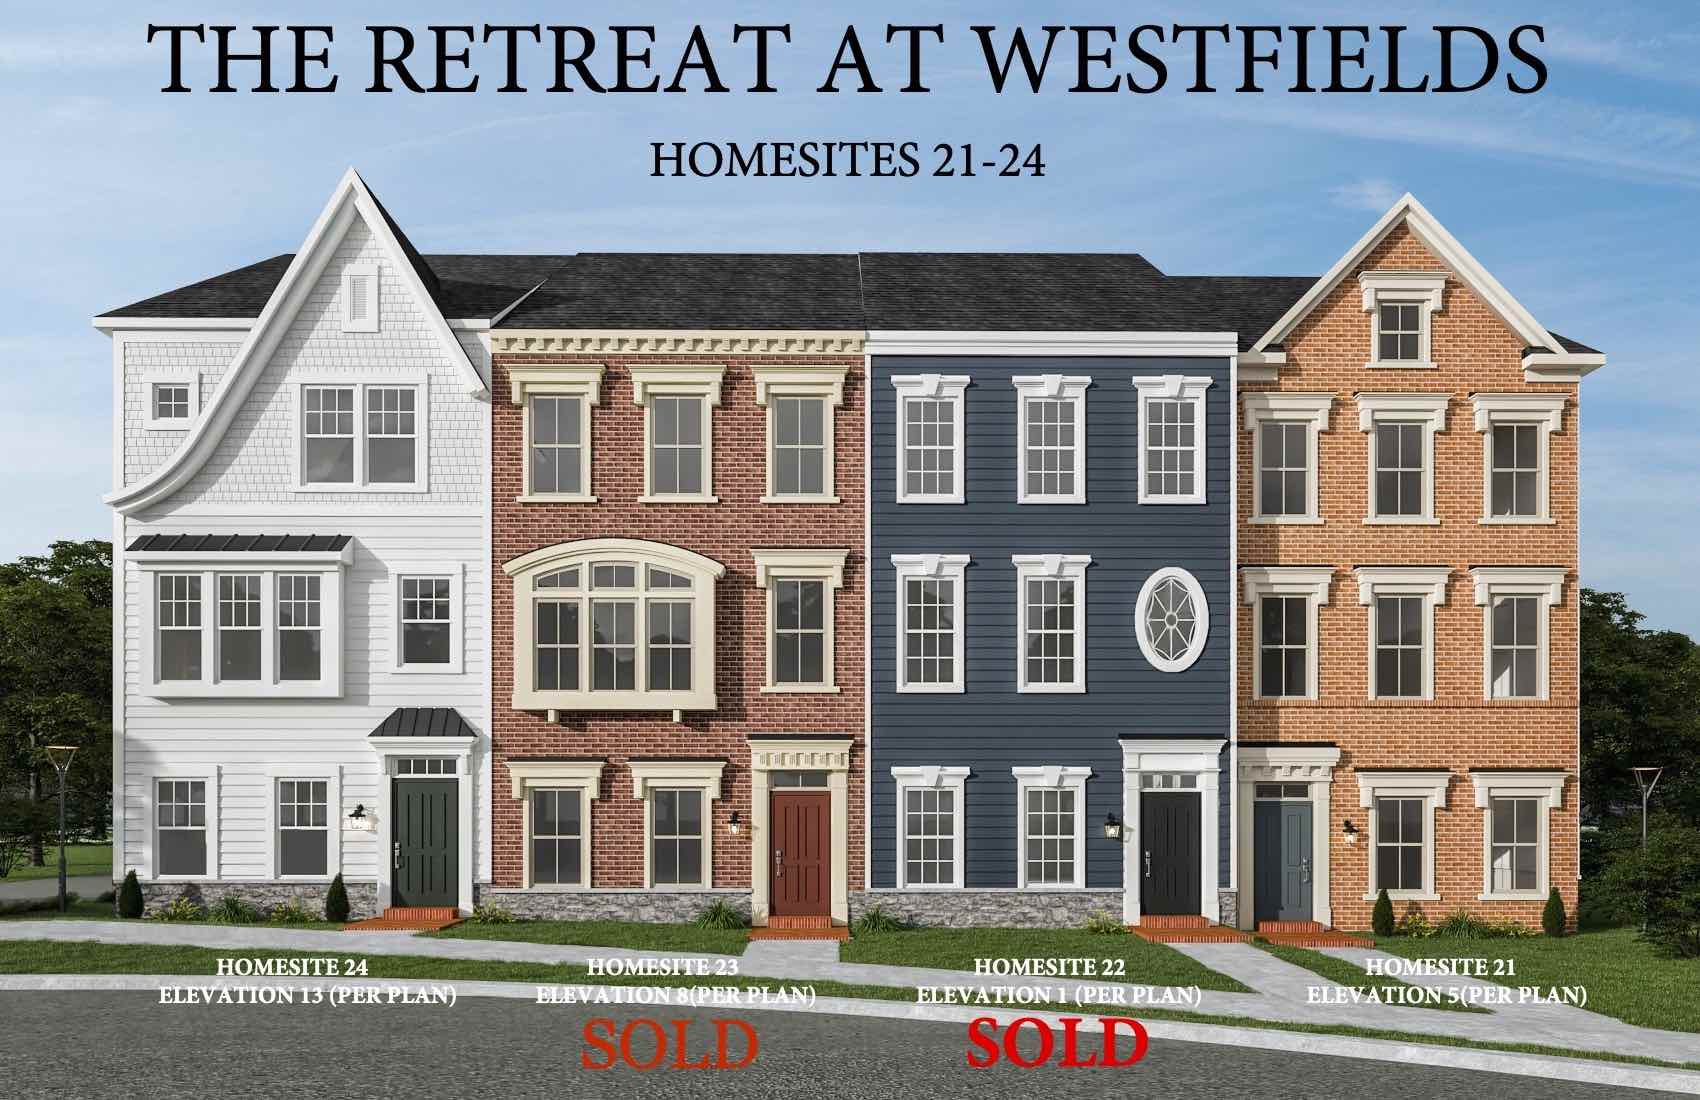 Lot 21 at The Retreat at Westfields